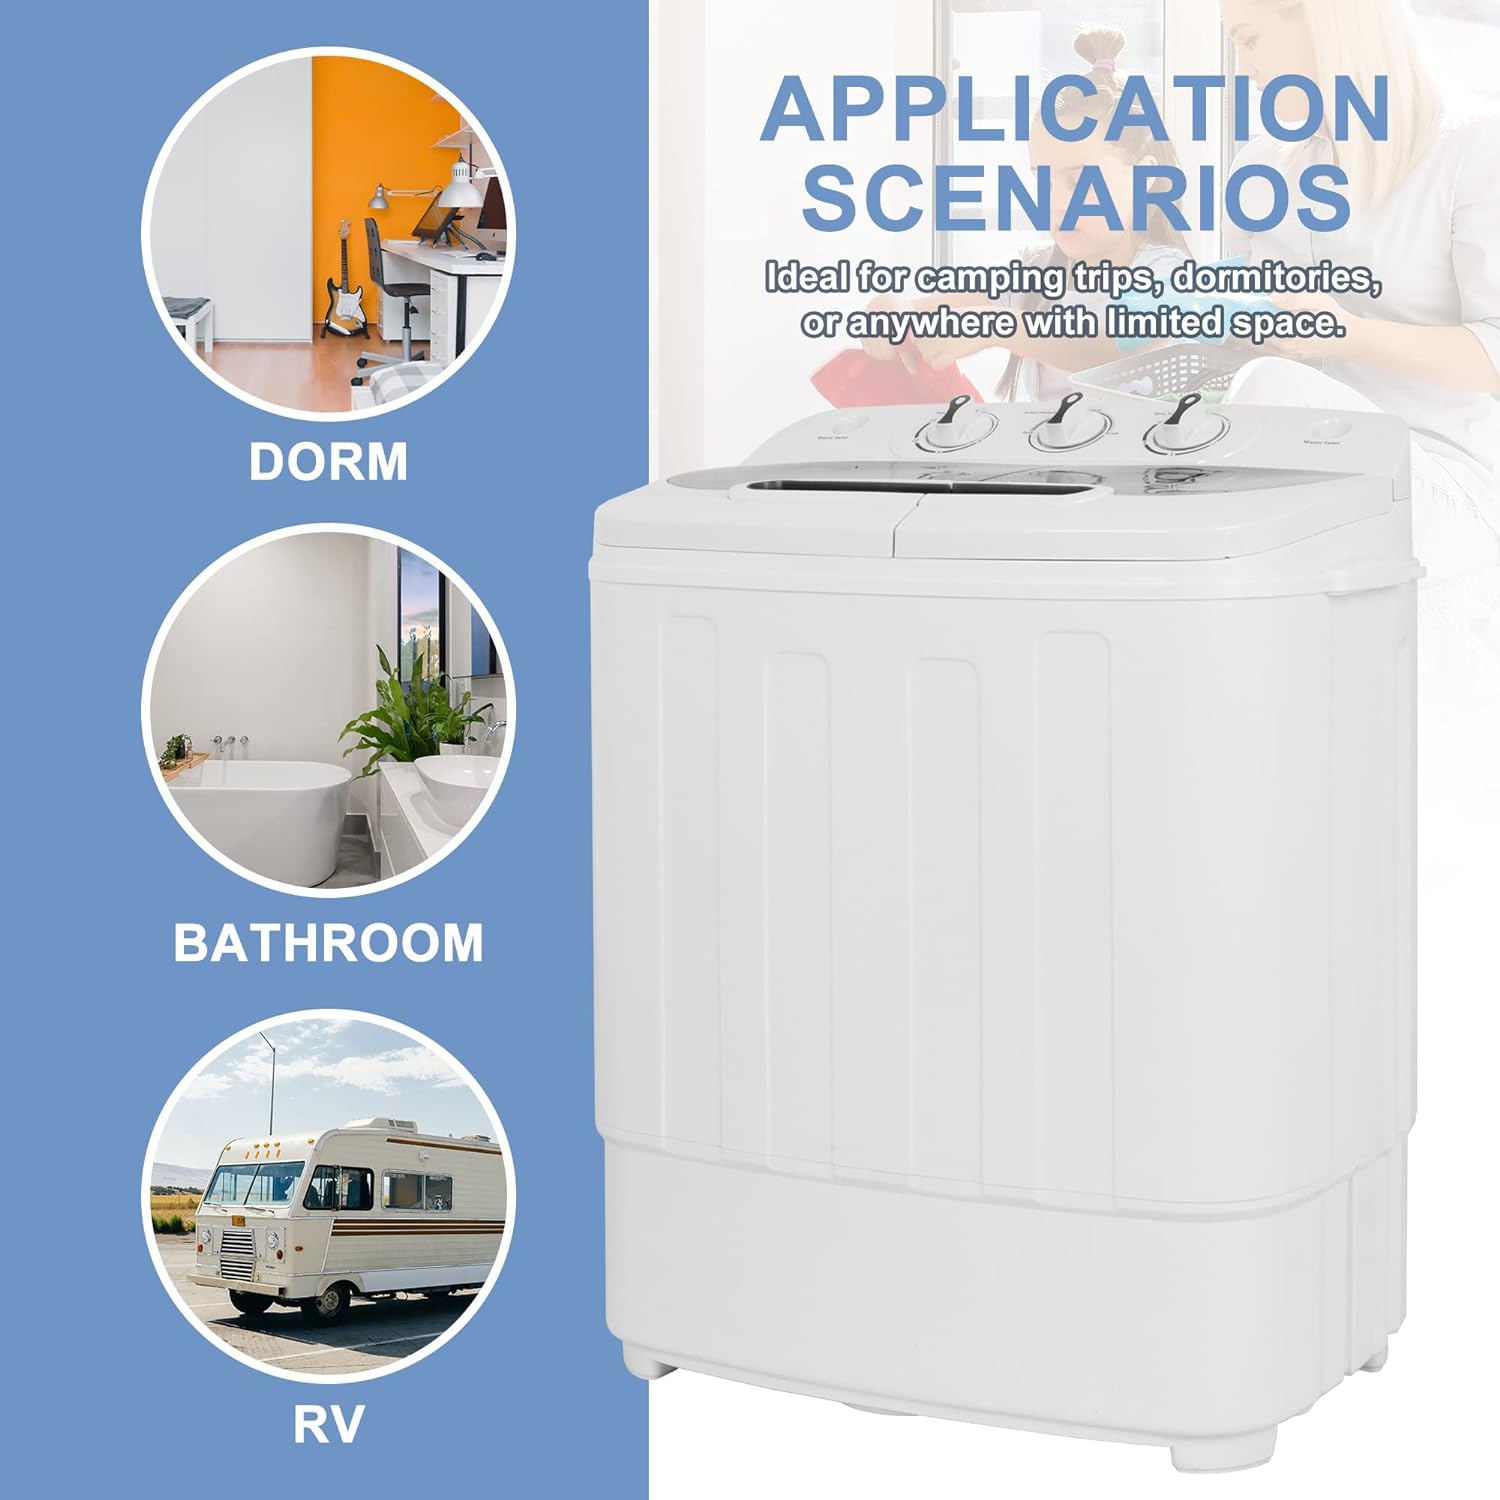 SUPER DEAL Compact Mini Twin Tub Washing Machine 13lbs Capacity Portable Washer Wash and Spin Cycle Combo, Built-in Gravity Drain for Camping, Apartments, Dorms, College, RV’s and Small Spaces